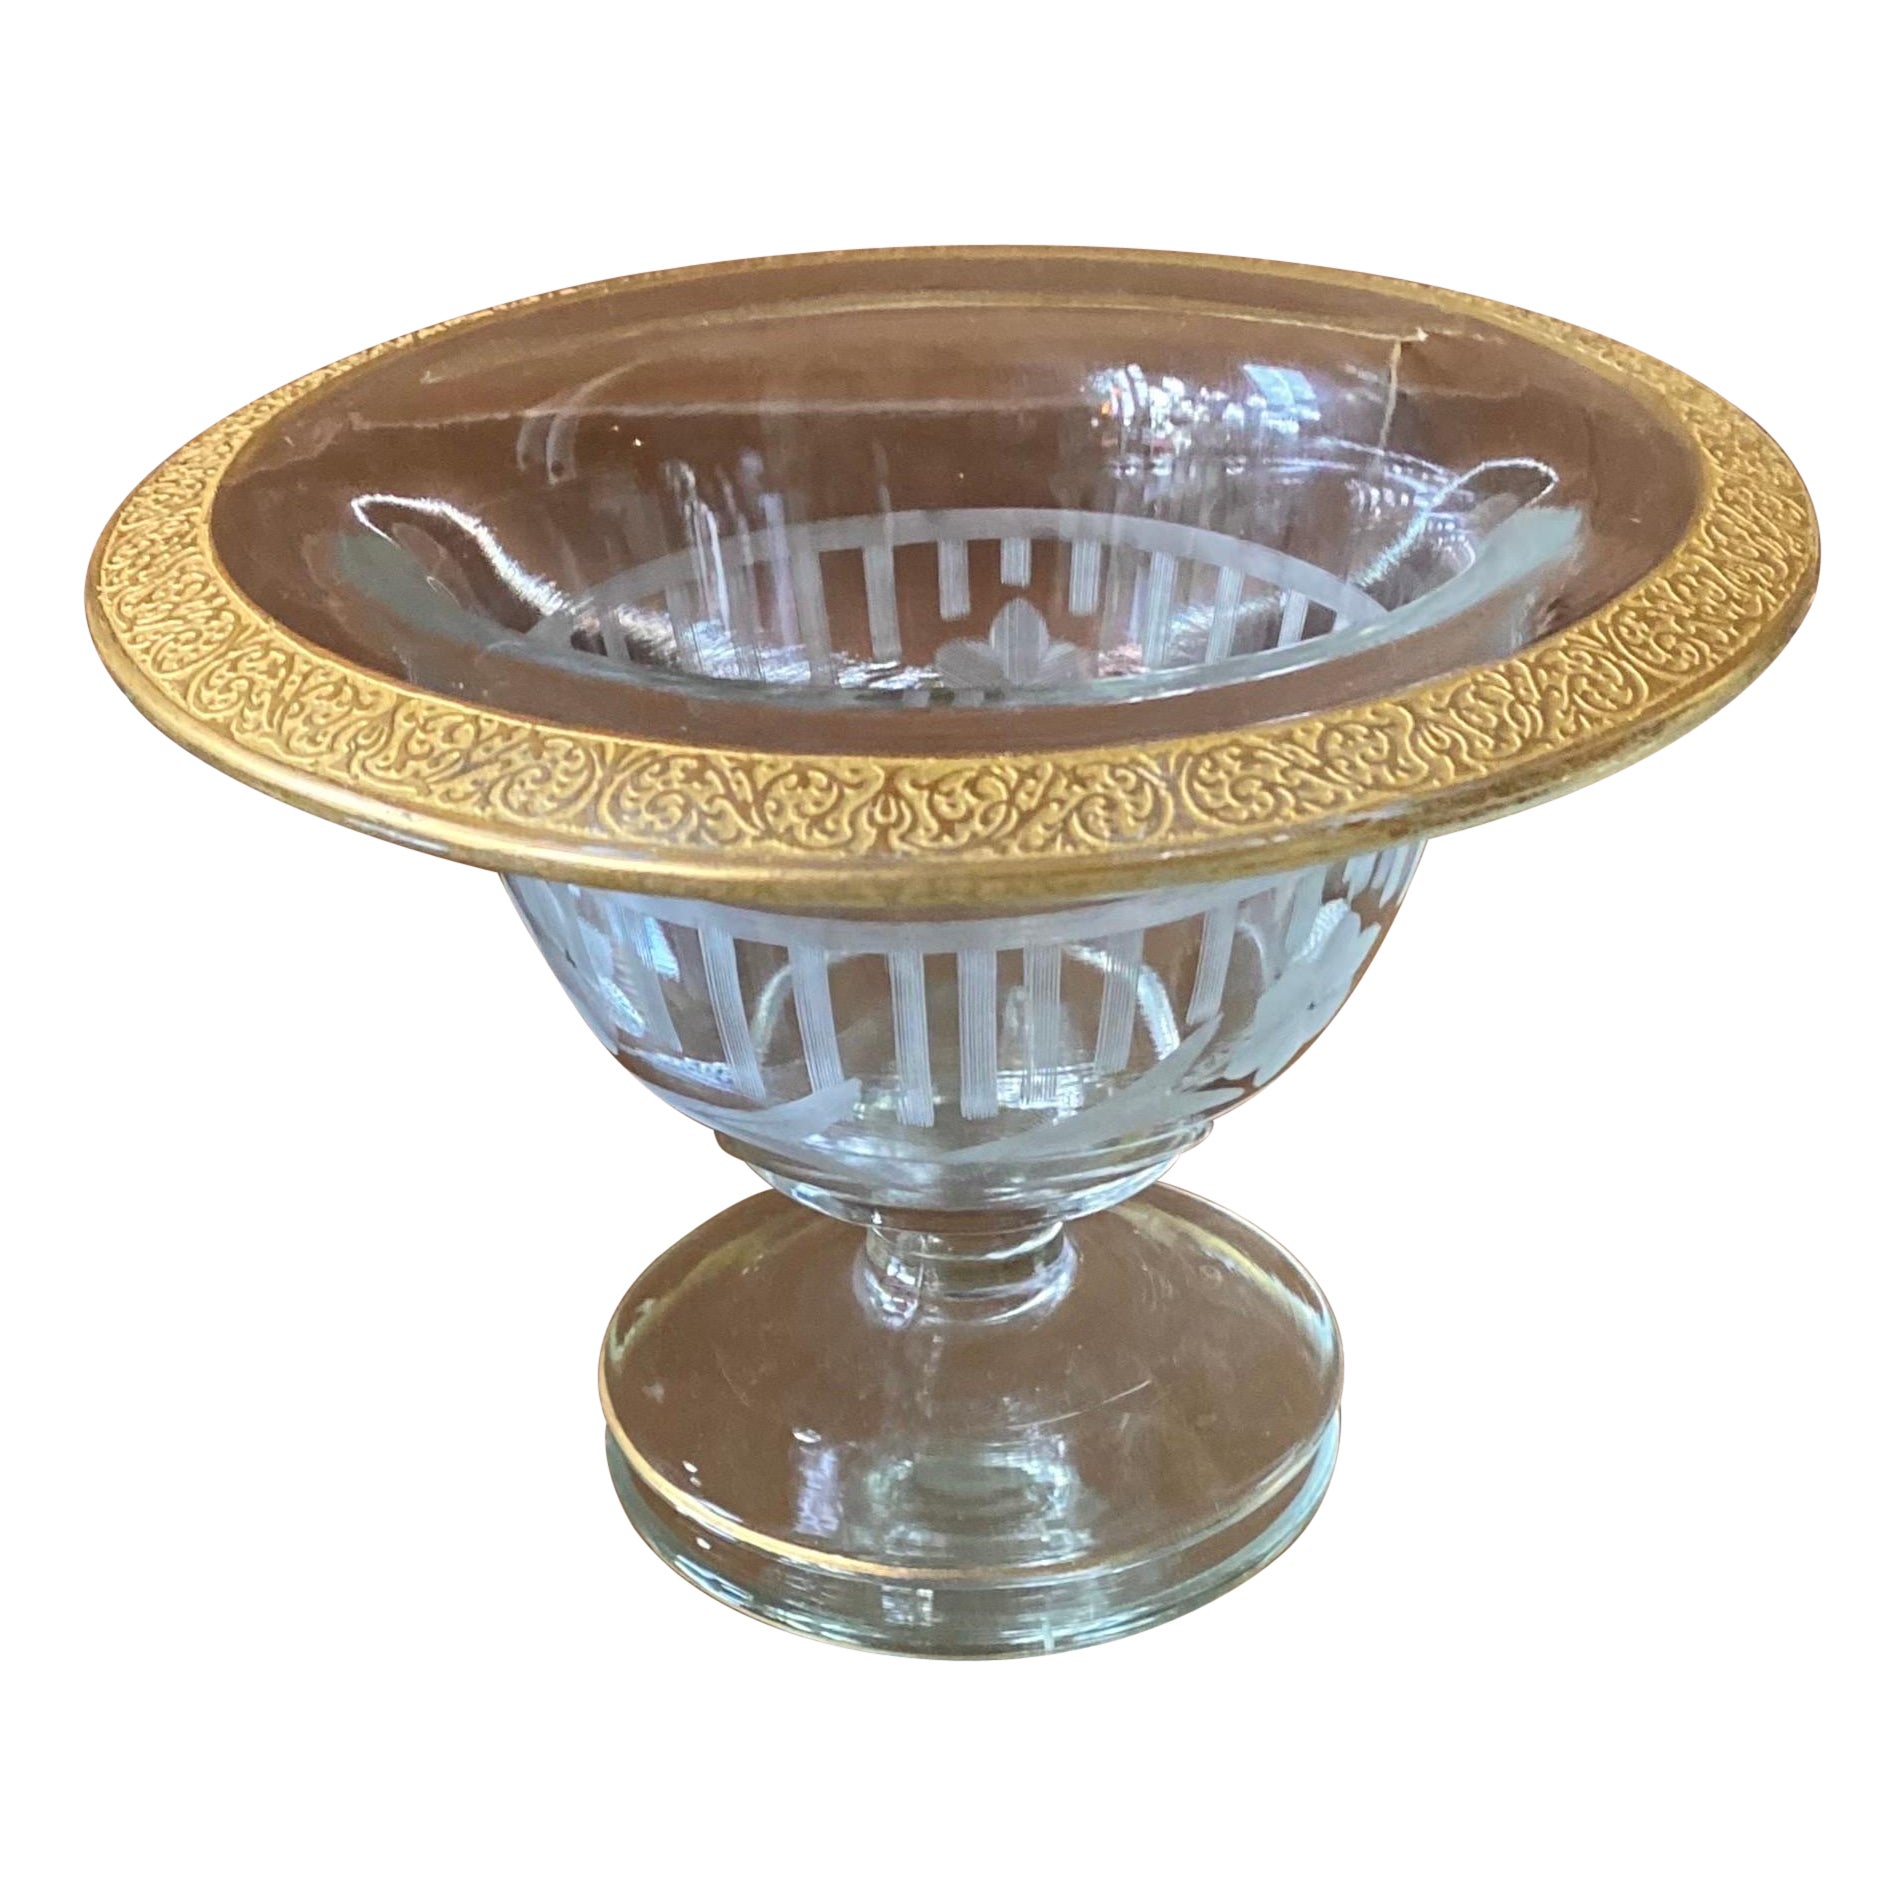 Antique Cut Glass Footed Compote Dish With Chased Gold Florentine Trim. For Sale